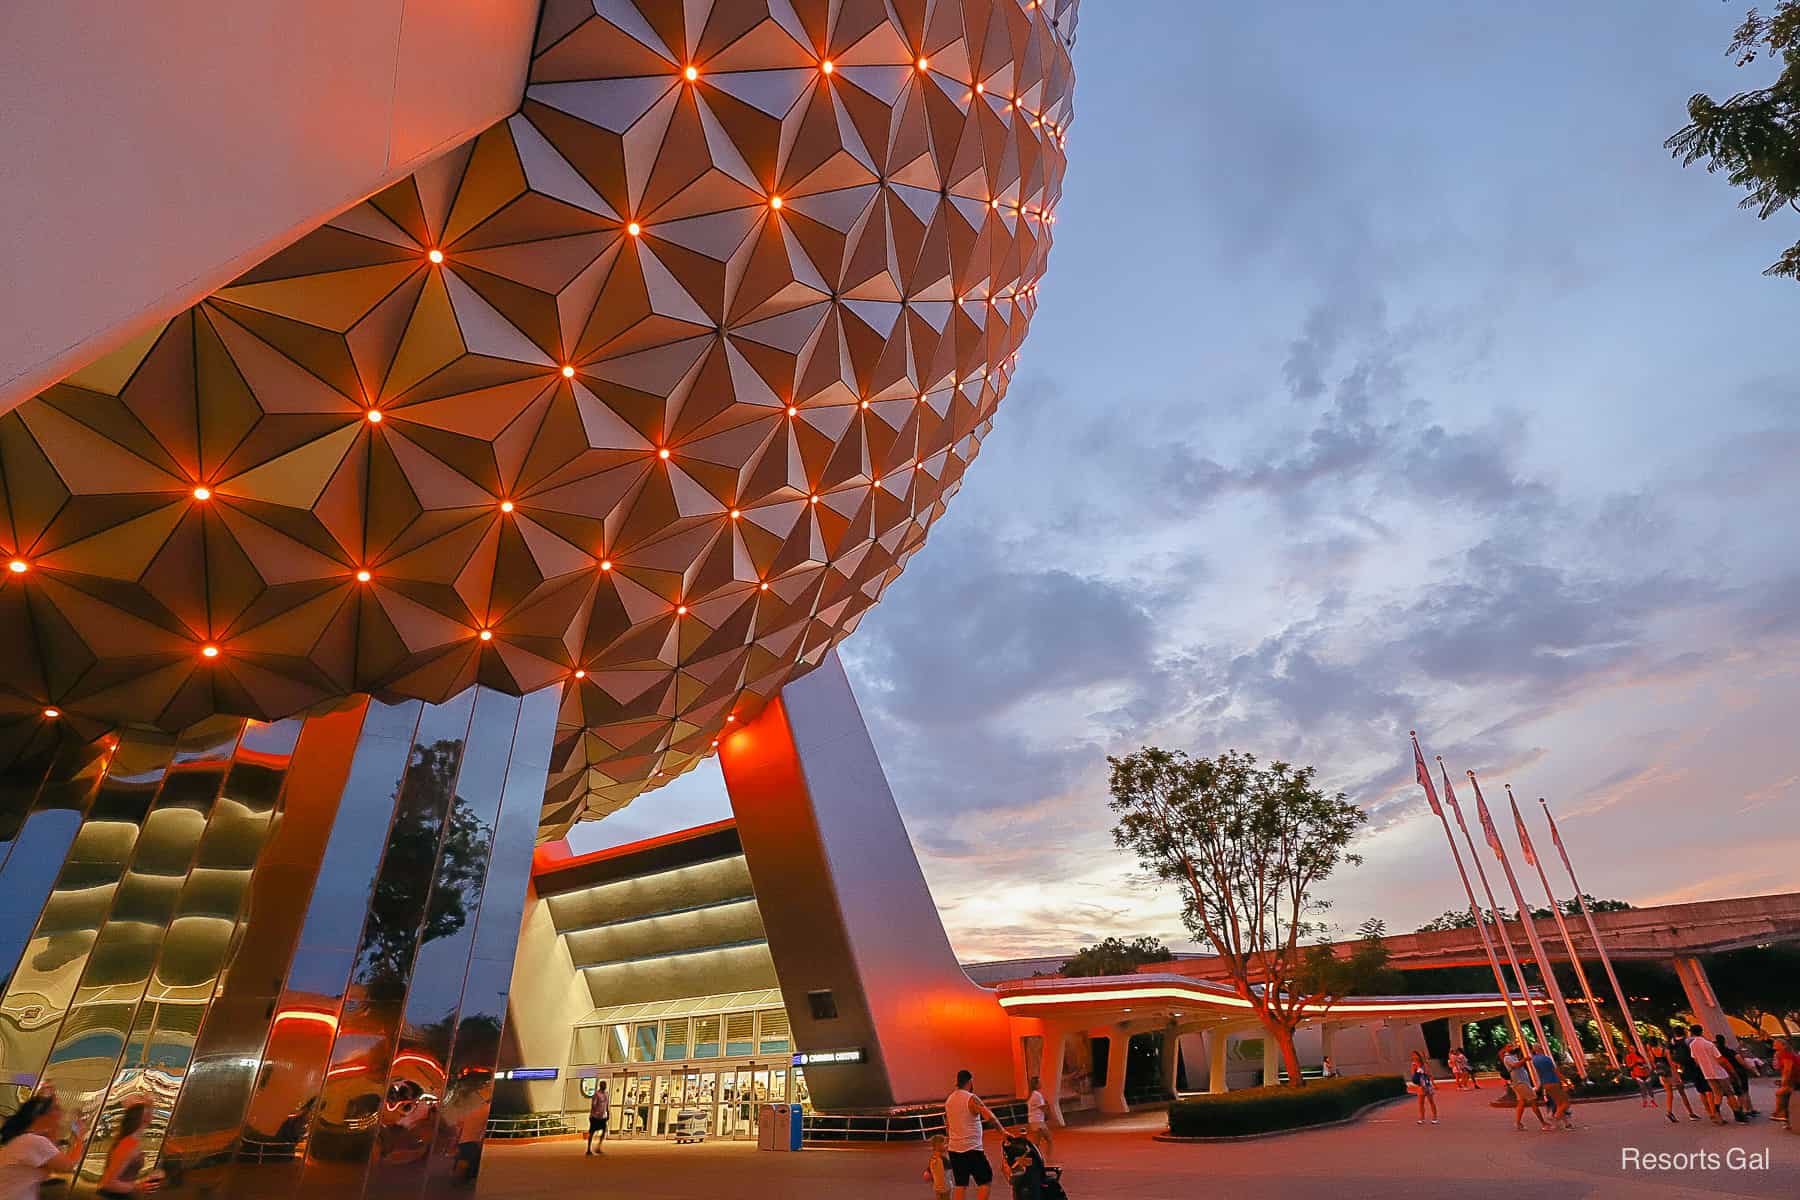 Spaceship Earth with the projection points in red at night. 